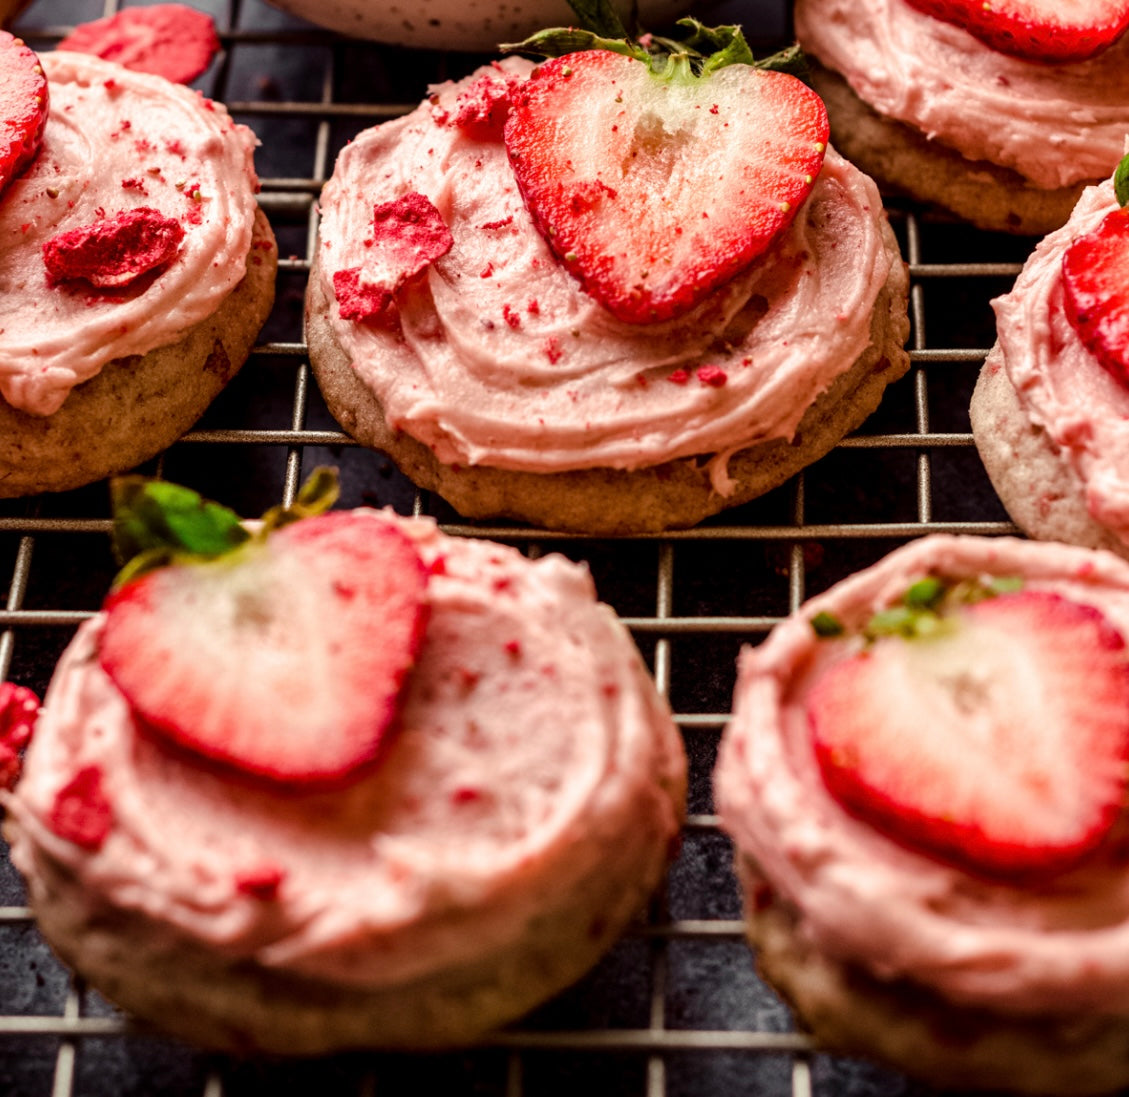 Strawberry Cookies-N-Creme Baking Class - Saturday, September 28th 2p-4p